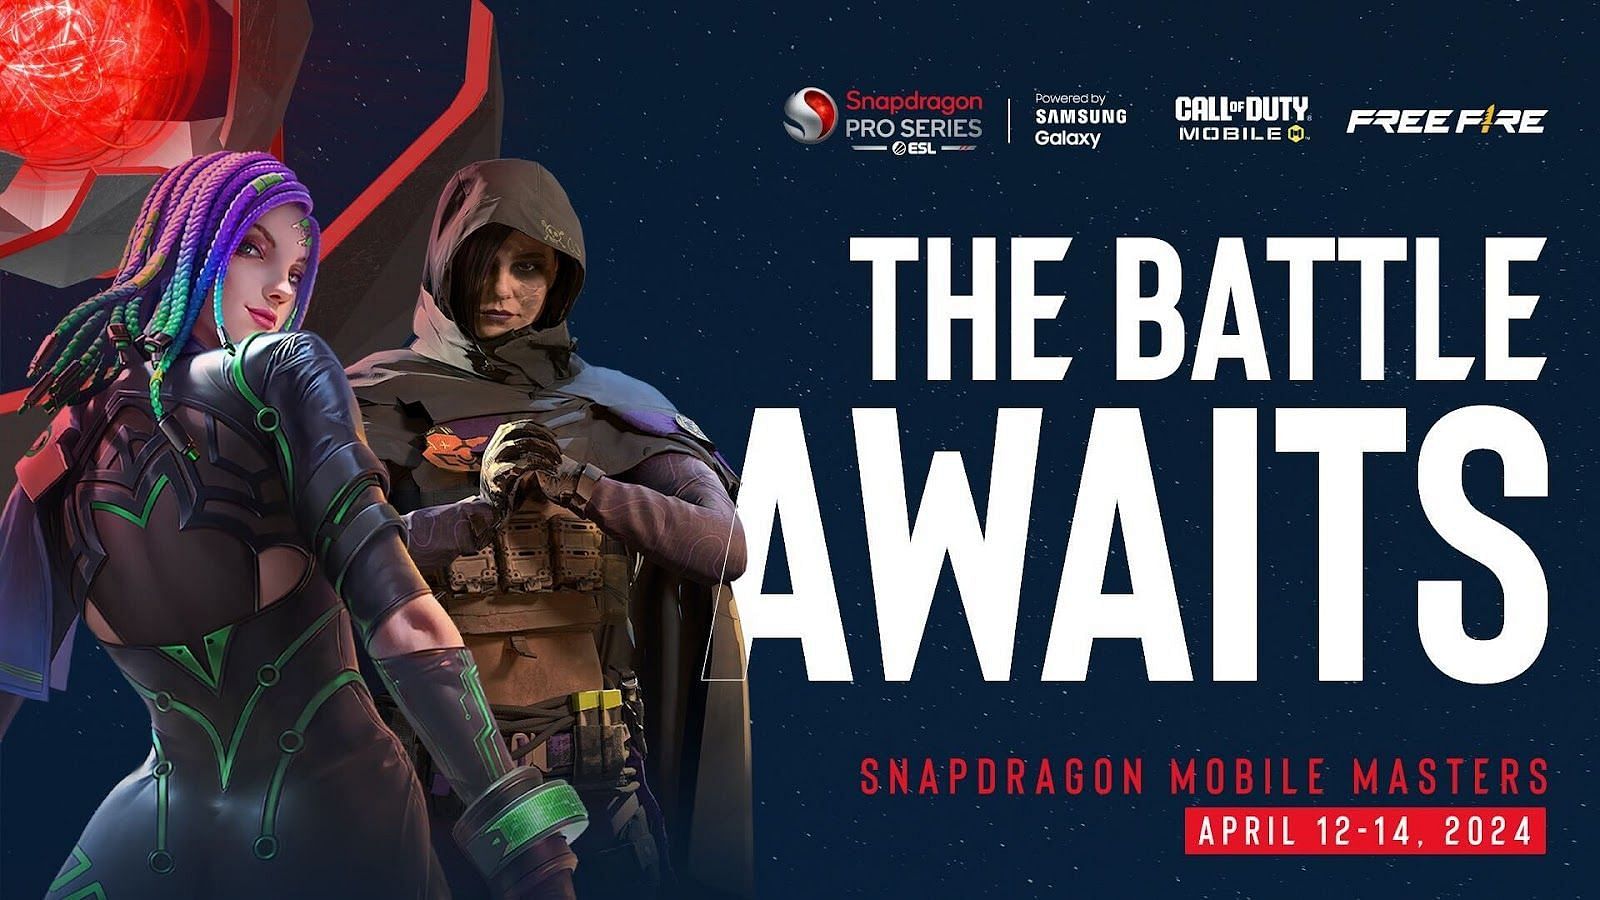 In Sao Paulo, Brazil, the Snapdragon Pro Series will be hosting the Mobile Masters.